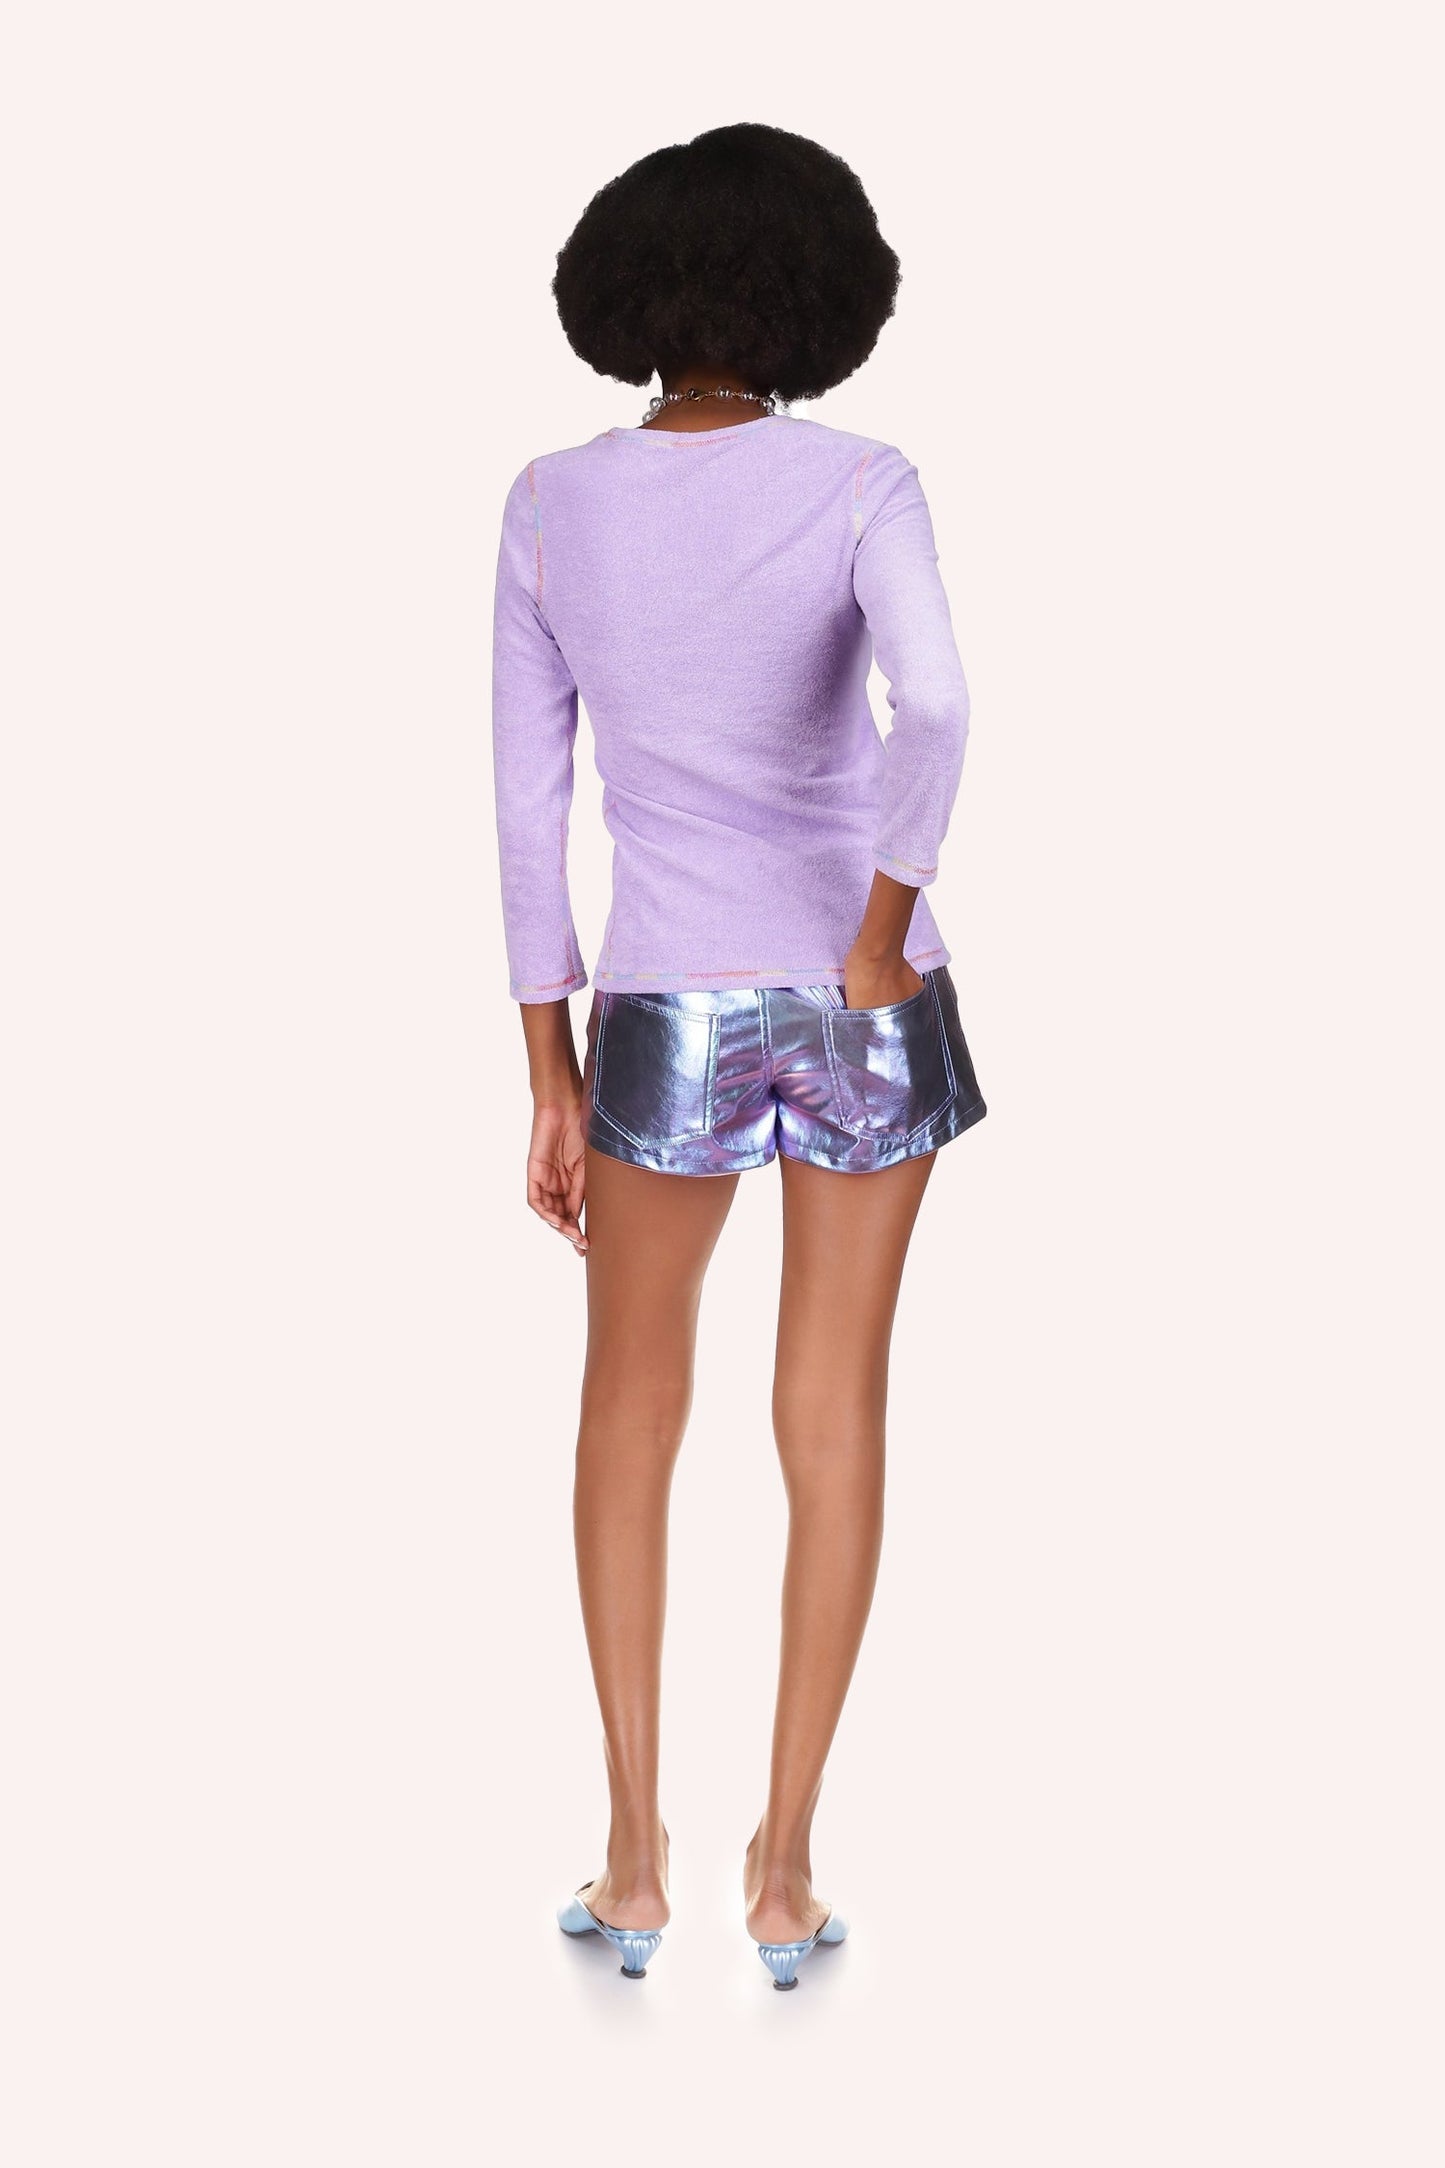 Metallic Faux Leather Shorts, metallic blue fitted short, 2 pockets on the back.